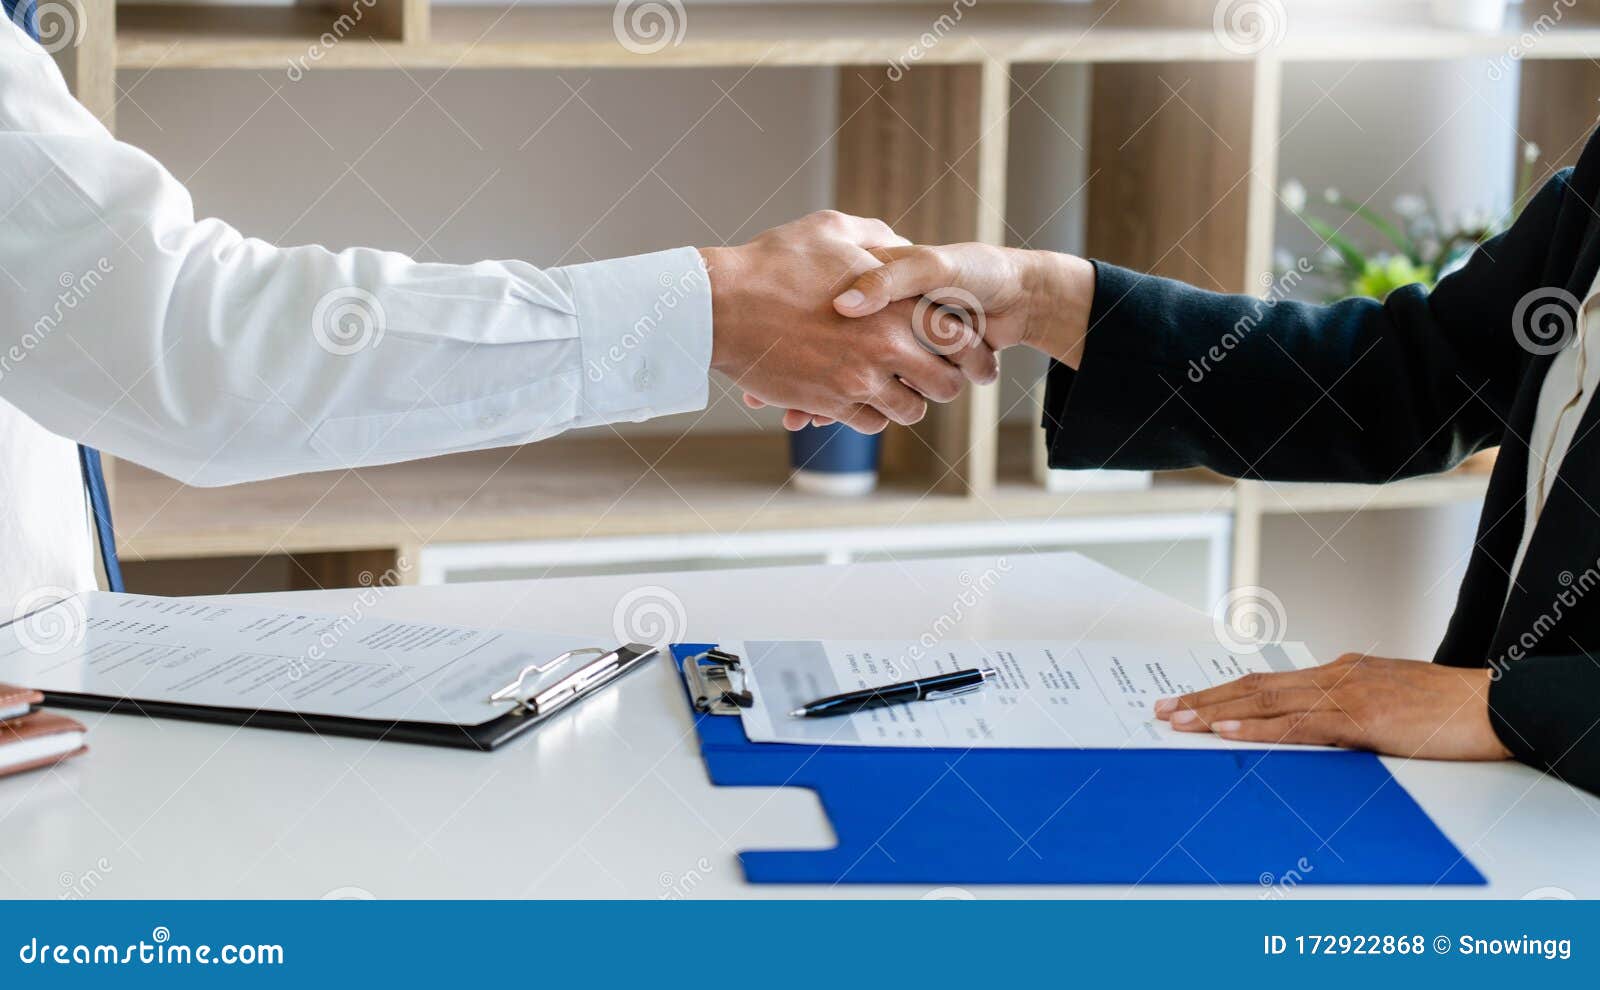 businessman and businesswoman handshaking over the office desk after greeting new colleague, business meetings concept